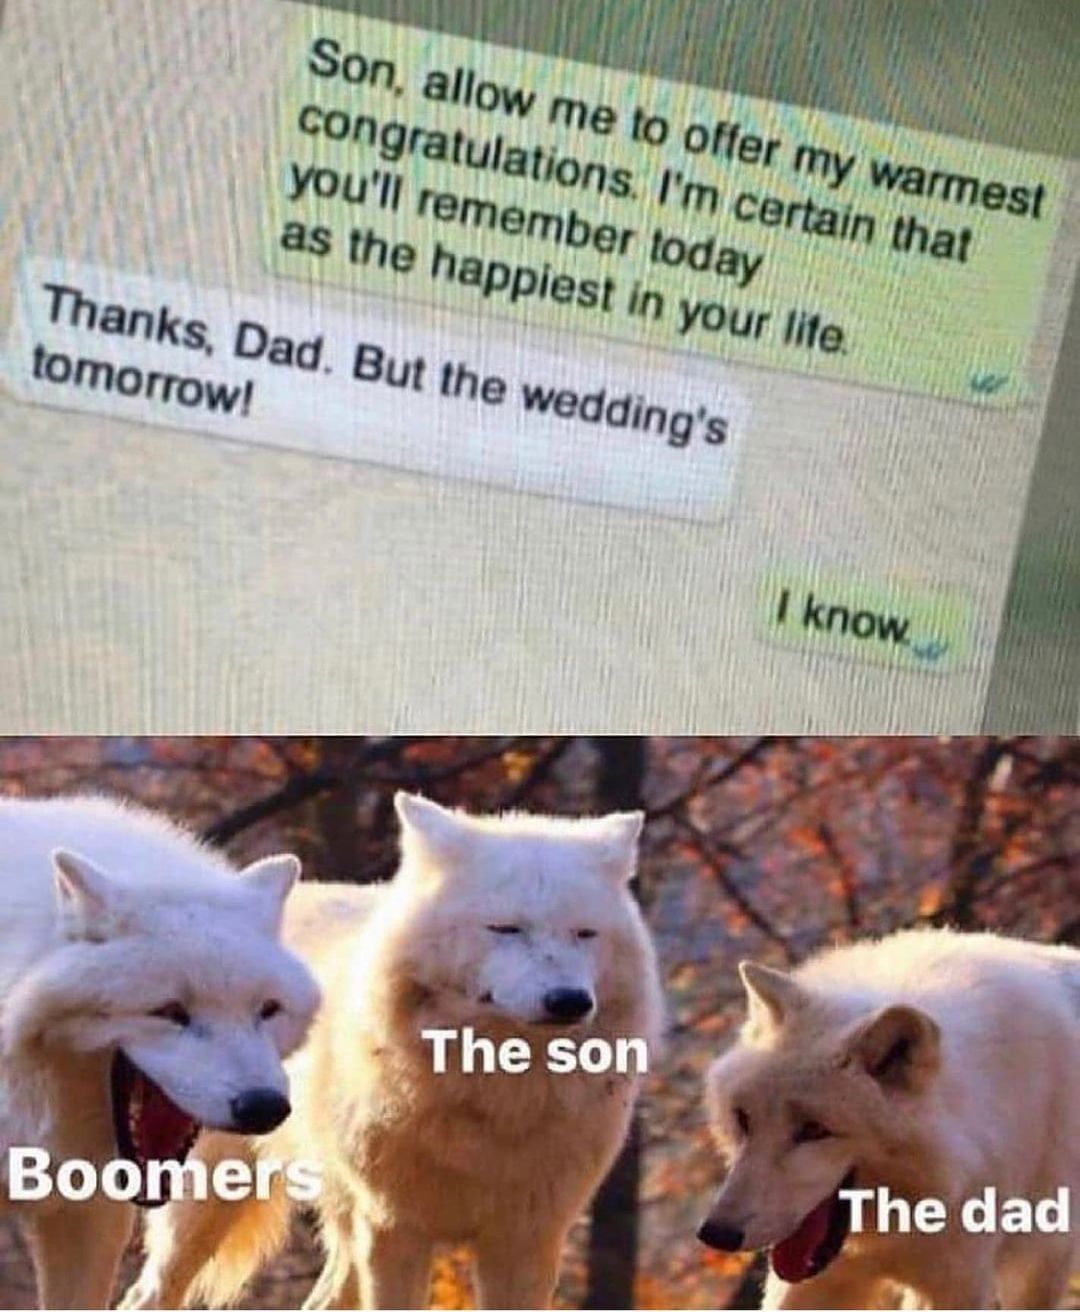 Son, allow me to offer my warmest congratulations. I'm certain that you'll remember today as the happiest in your life.  Thanks, Dad. But the wedding's tomorrow!  I know.  The son. Boomers. The dad.